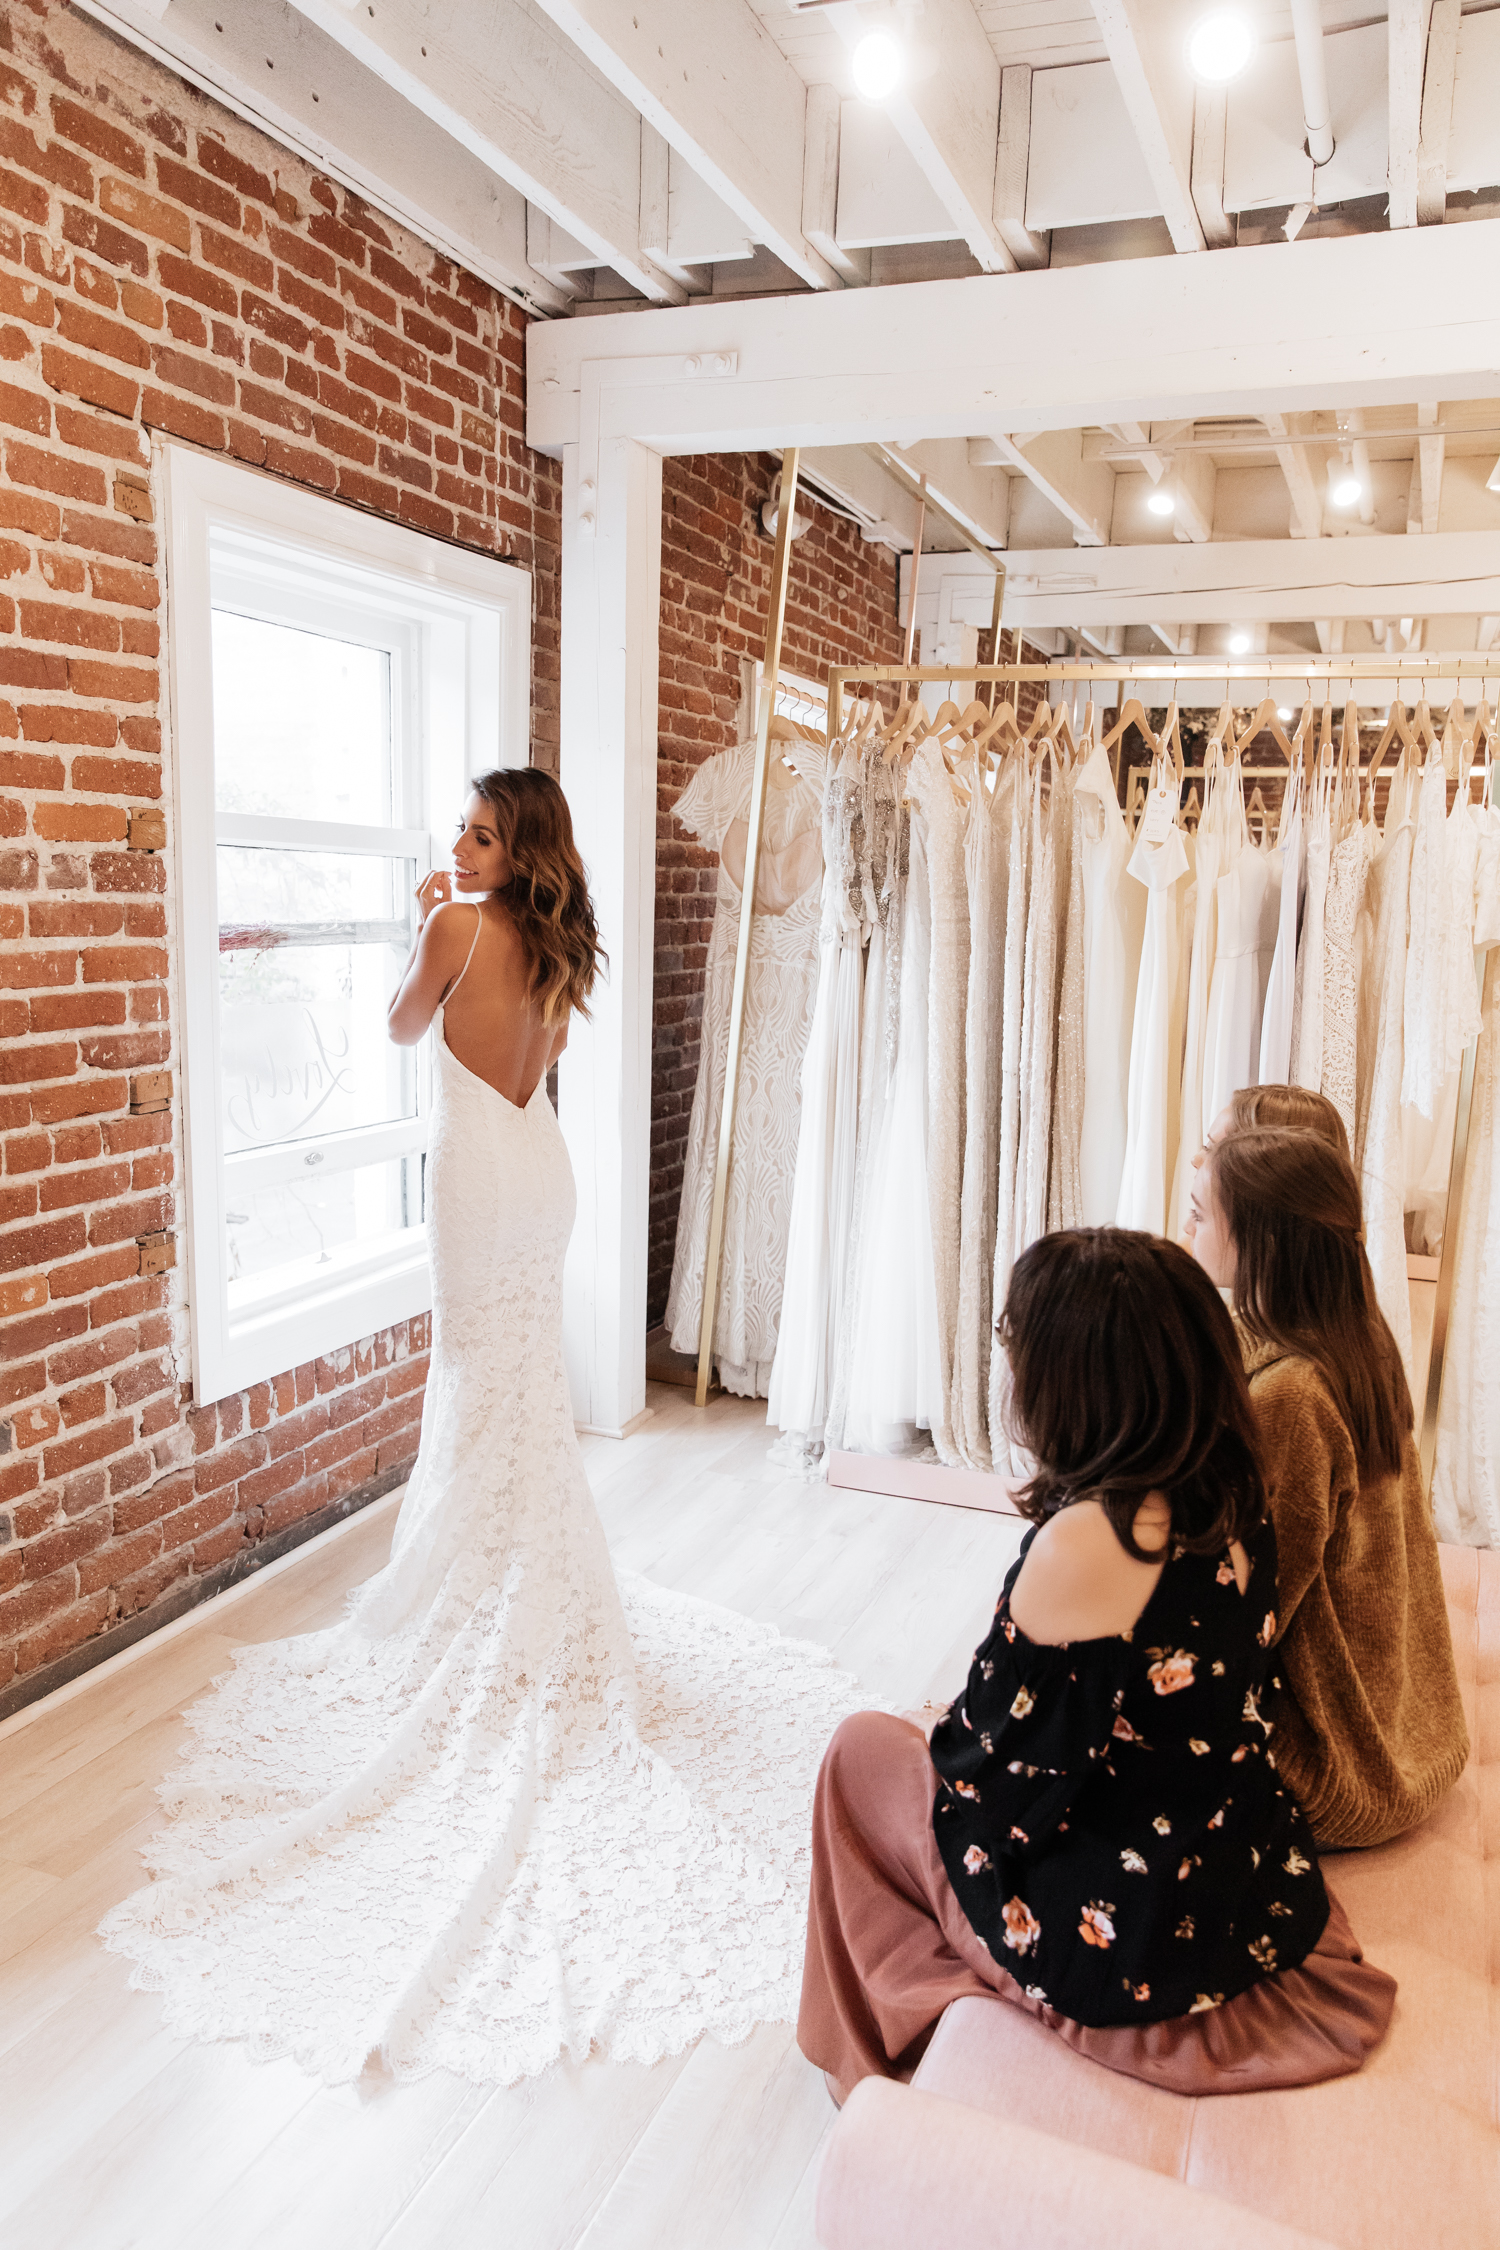 wedding dress shopping with the bride